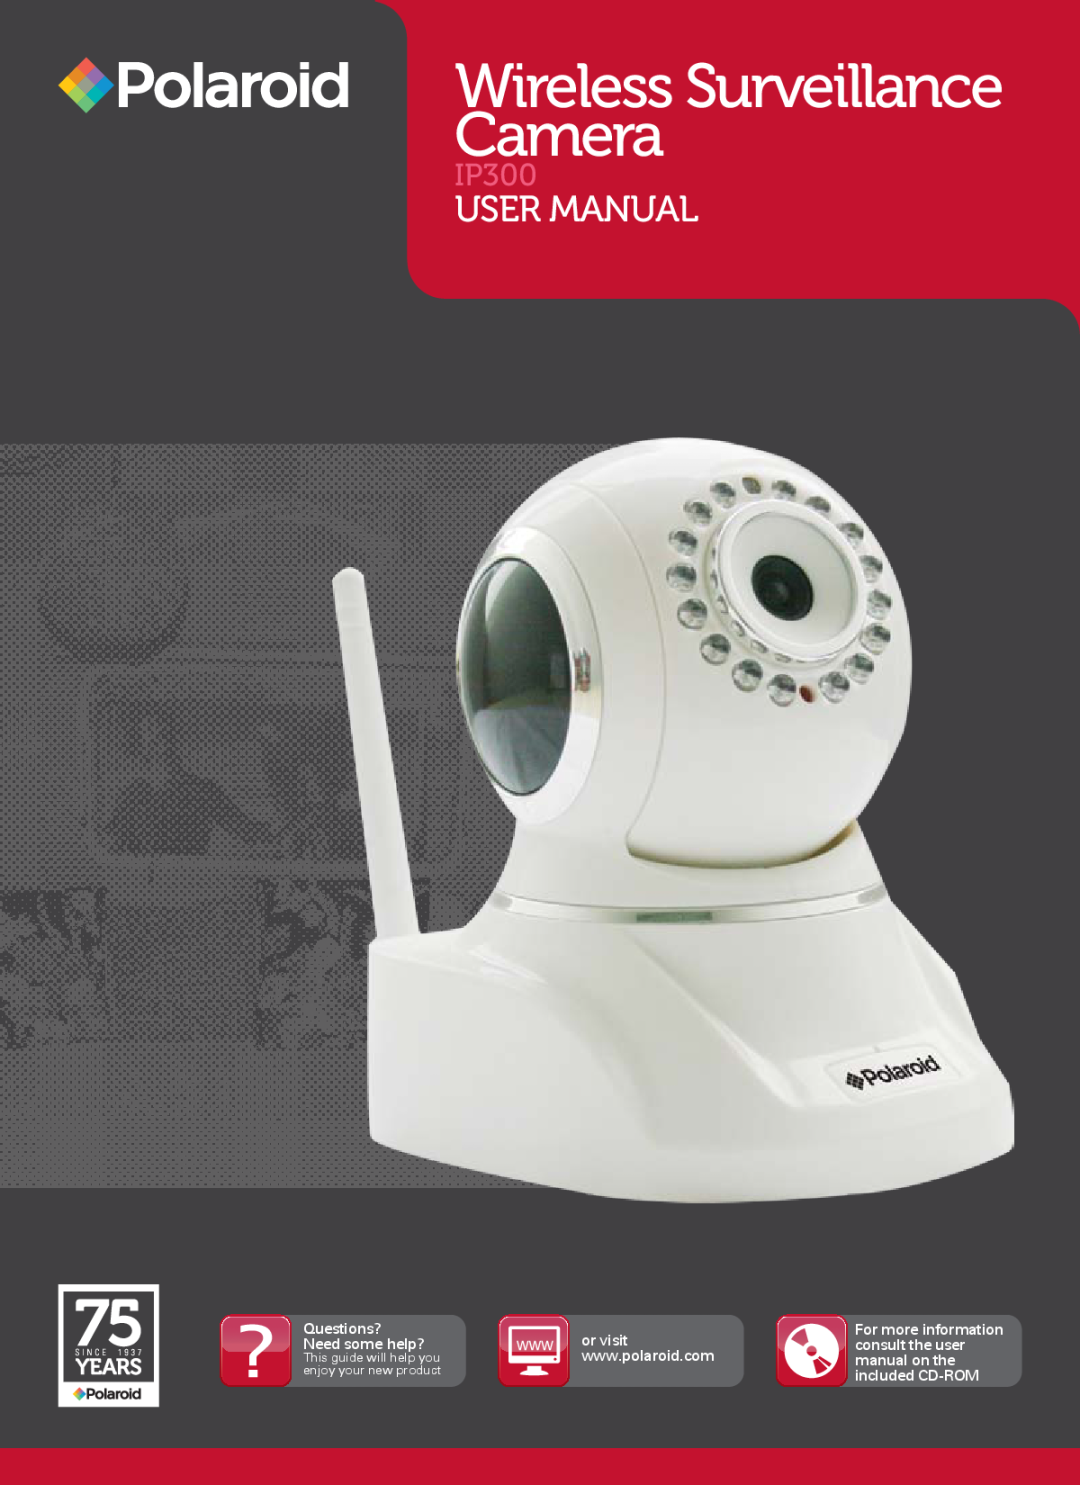 Polaroid Wireless Surveillance Camera user manual IP300, Questions? Need some help? 